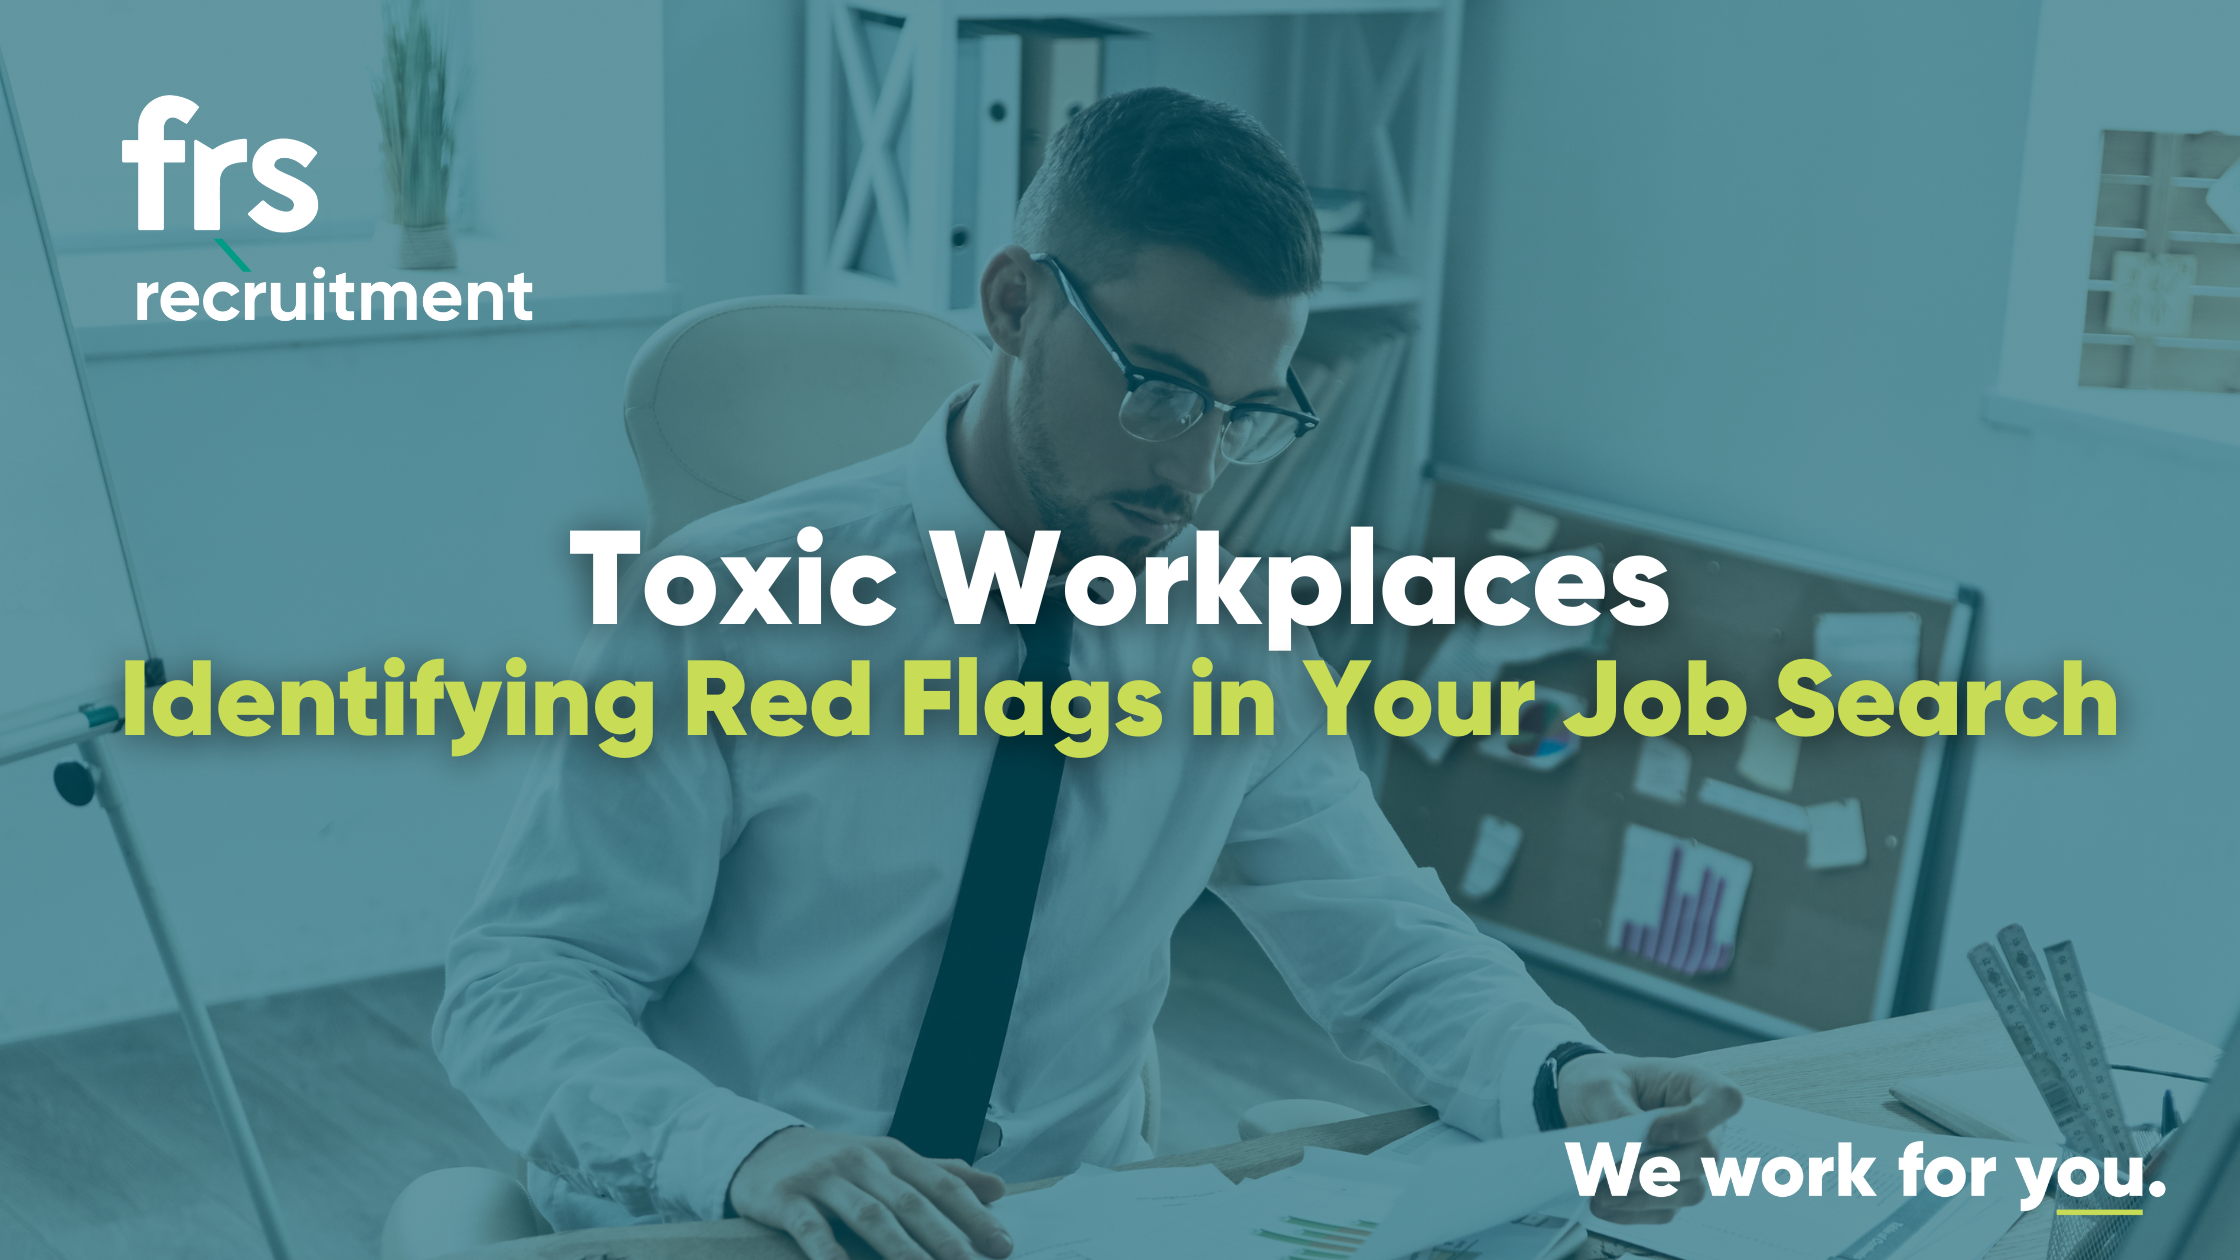 Toxic Workplaces: Identifying Red Flags in Your Job Search